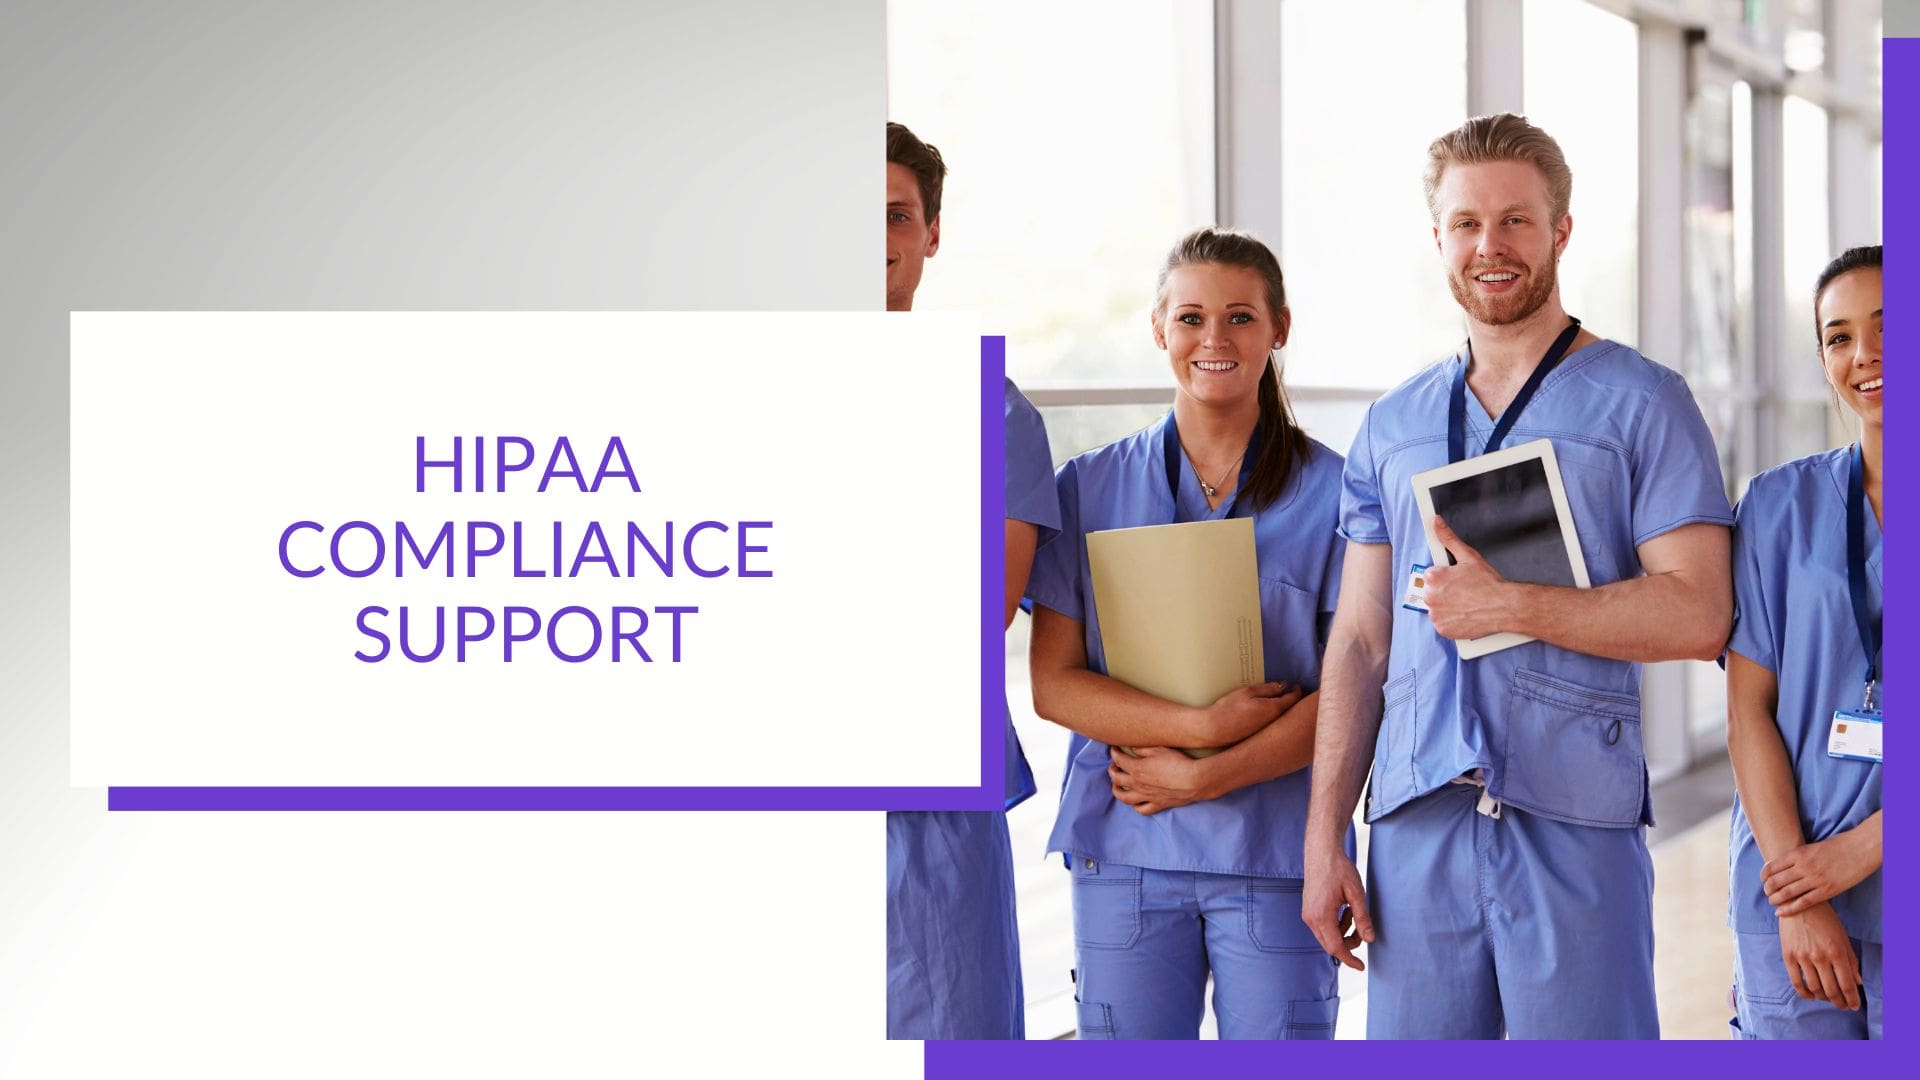 HIPAA compliance support services Aeko